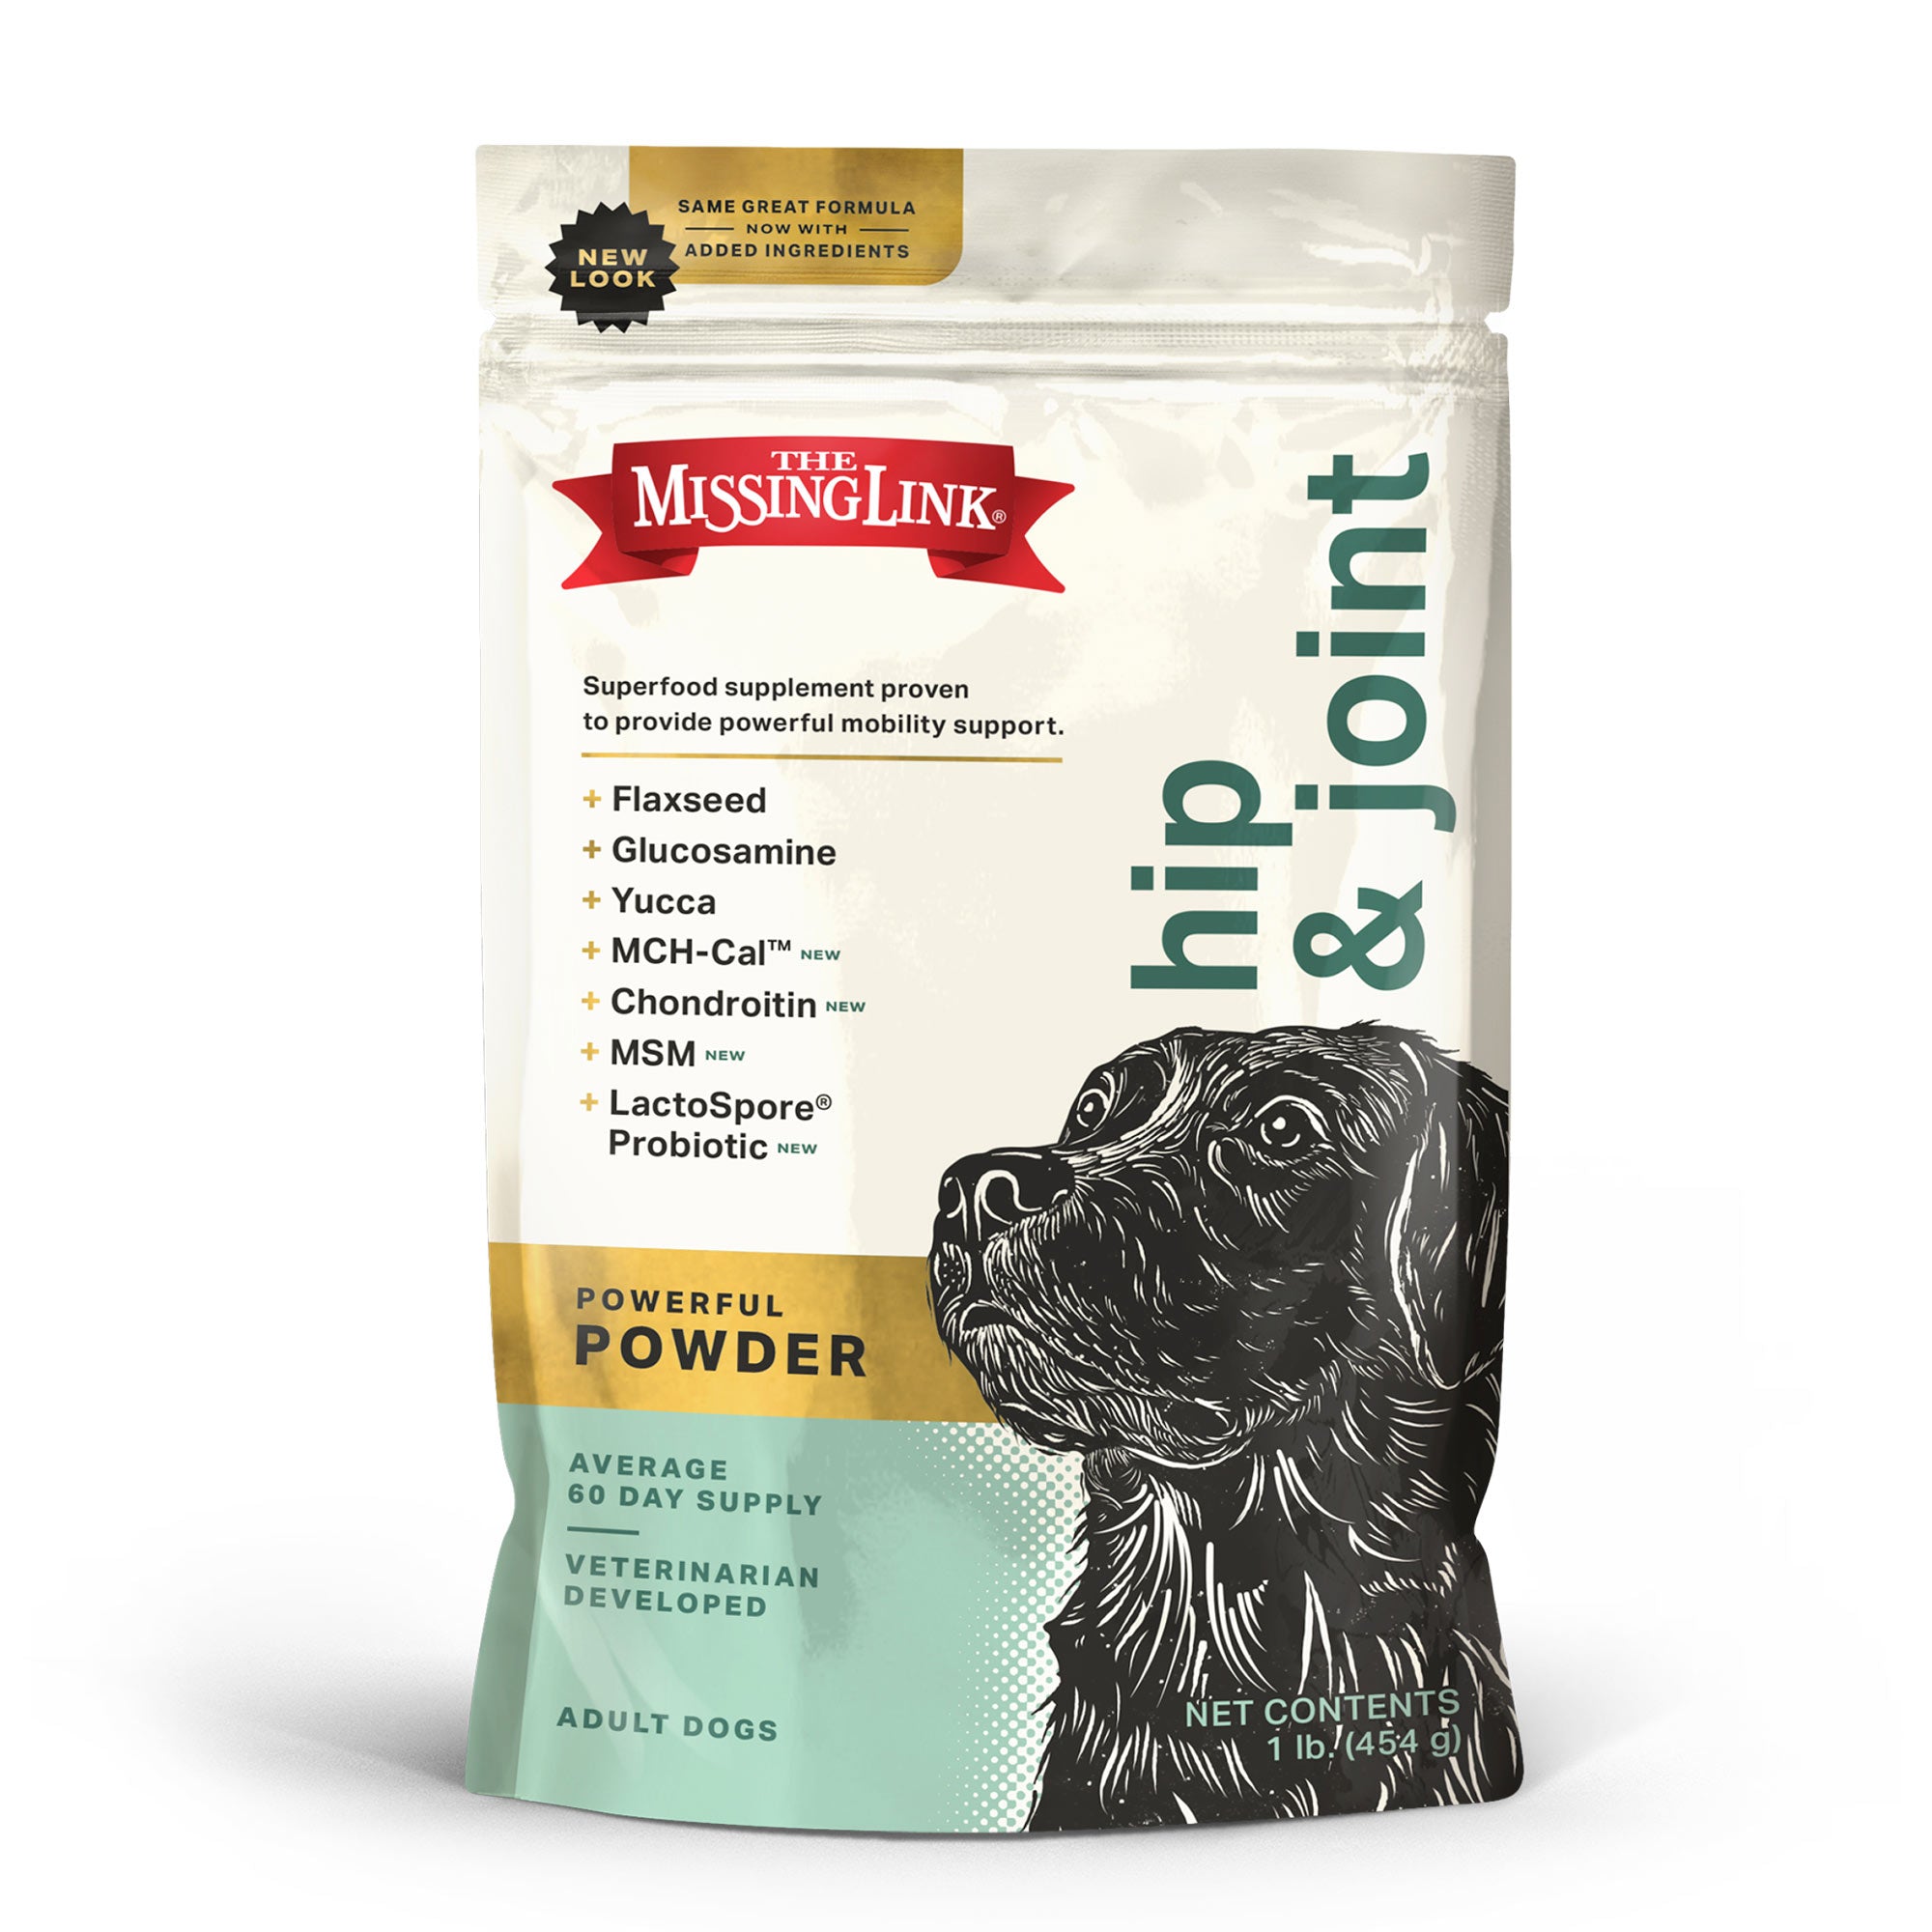 The Missing Link Hip & Joint powerful powder, veterinarian developed superfood supplement.